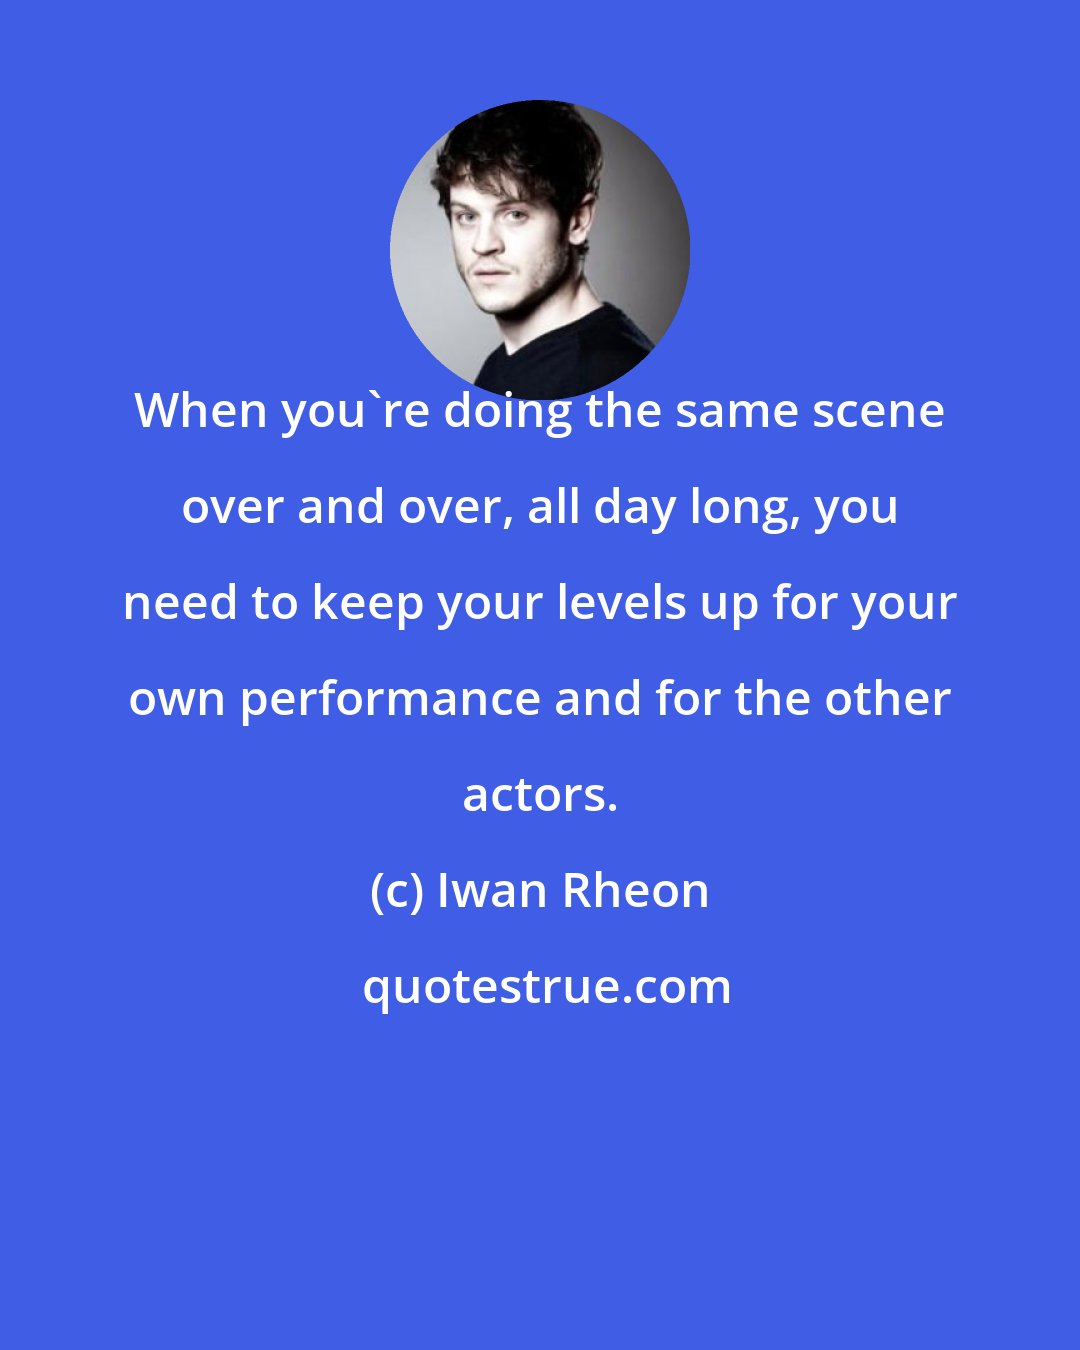 Iwan Rheon: When you're doing the same scene over and over, all day long, you need to keep your levels up for your own performance and for the other actors.